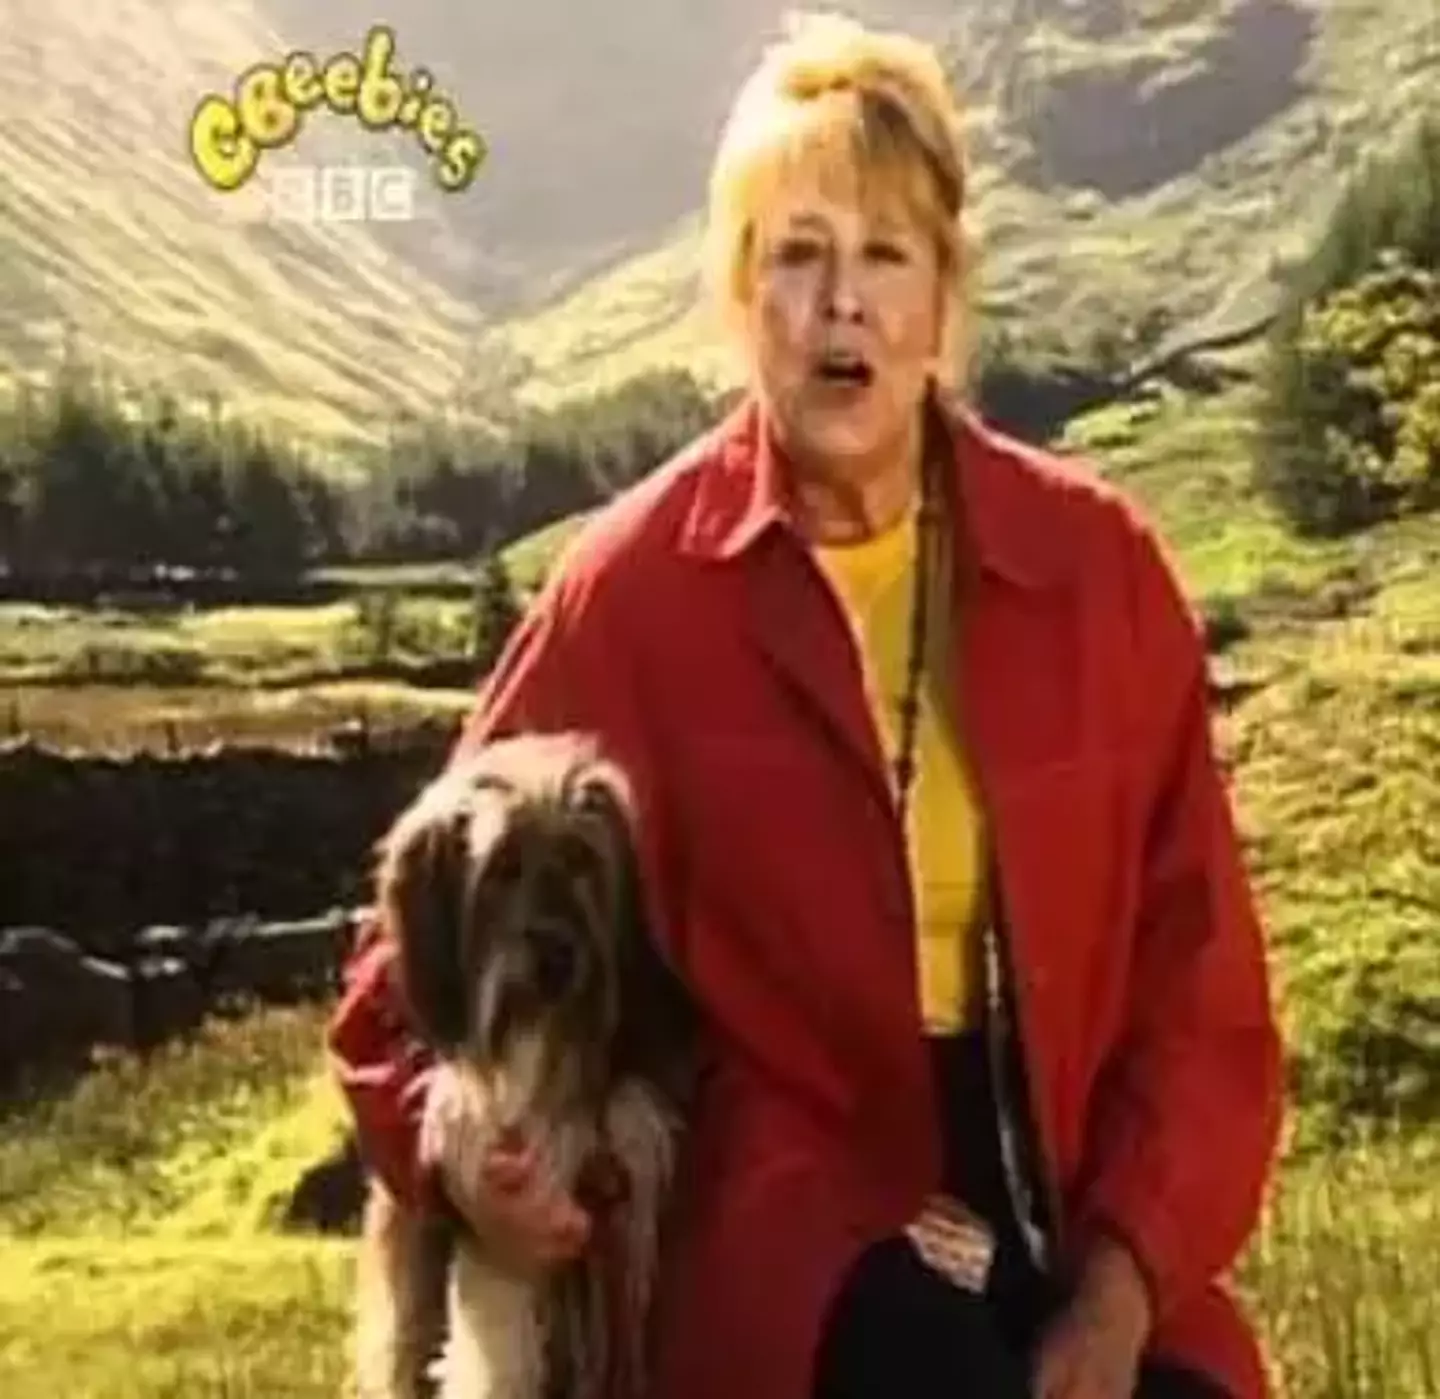 Come Outside featured Lynda Baron as Auntie Mabel and her dog 'Pippin'.